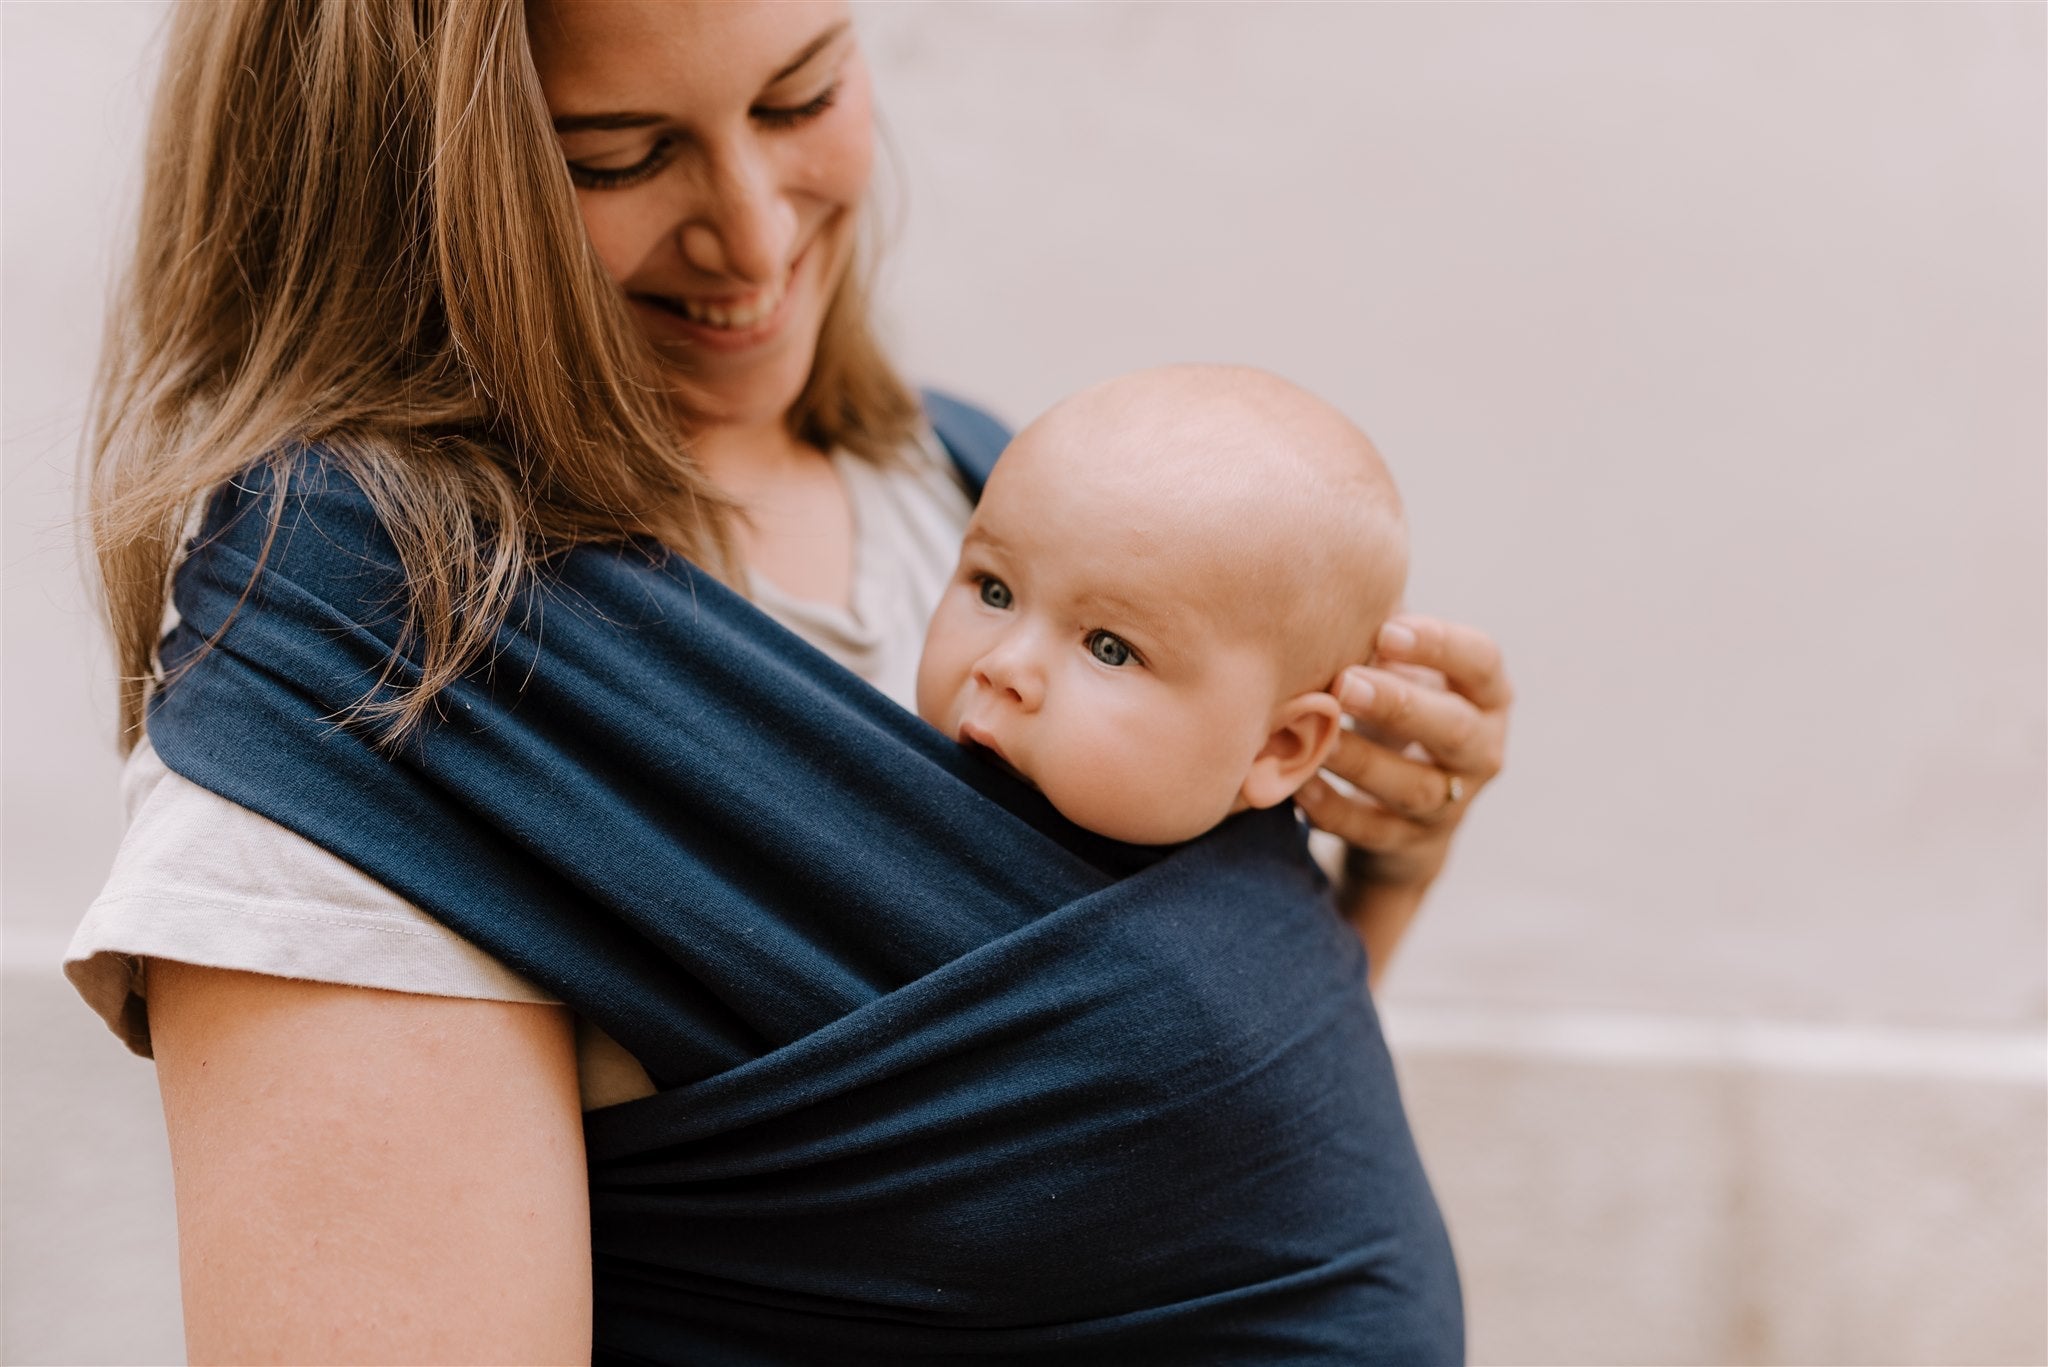 Cute mother and baby duo are enjoying their babywearing experience with the navy boba classic wrap.